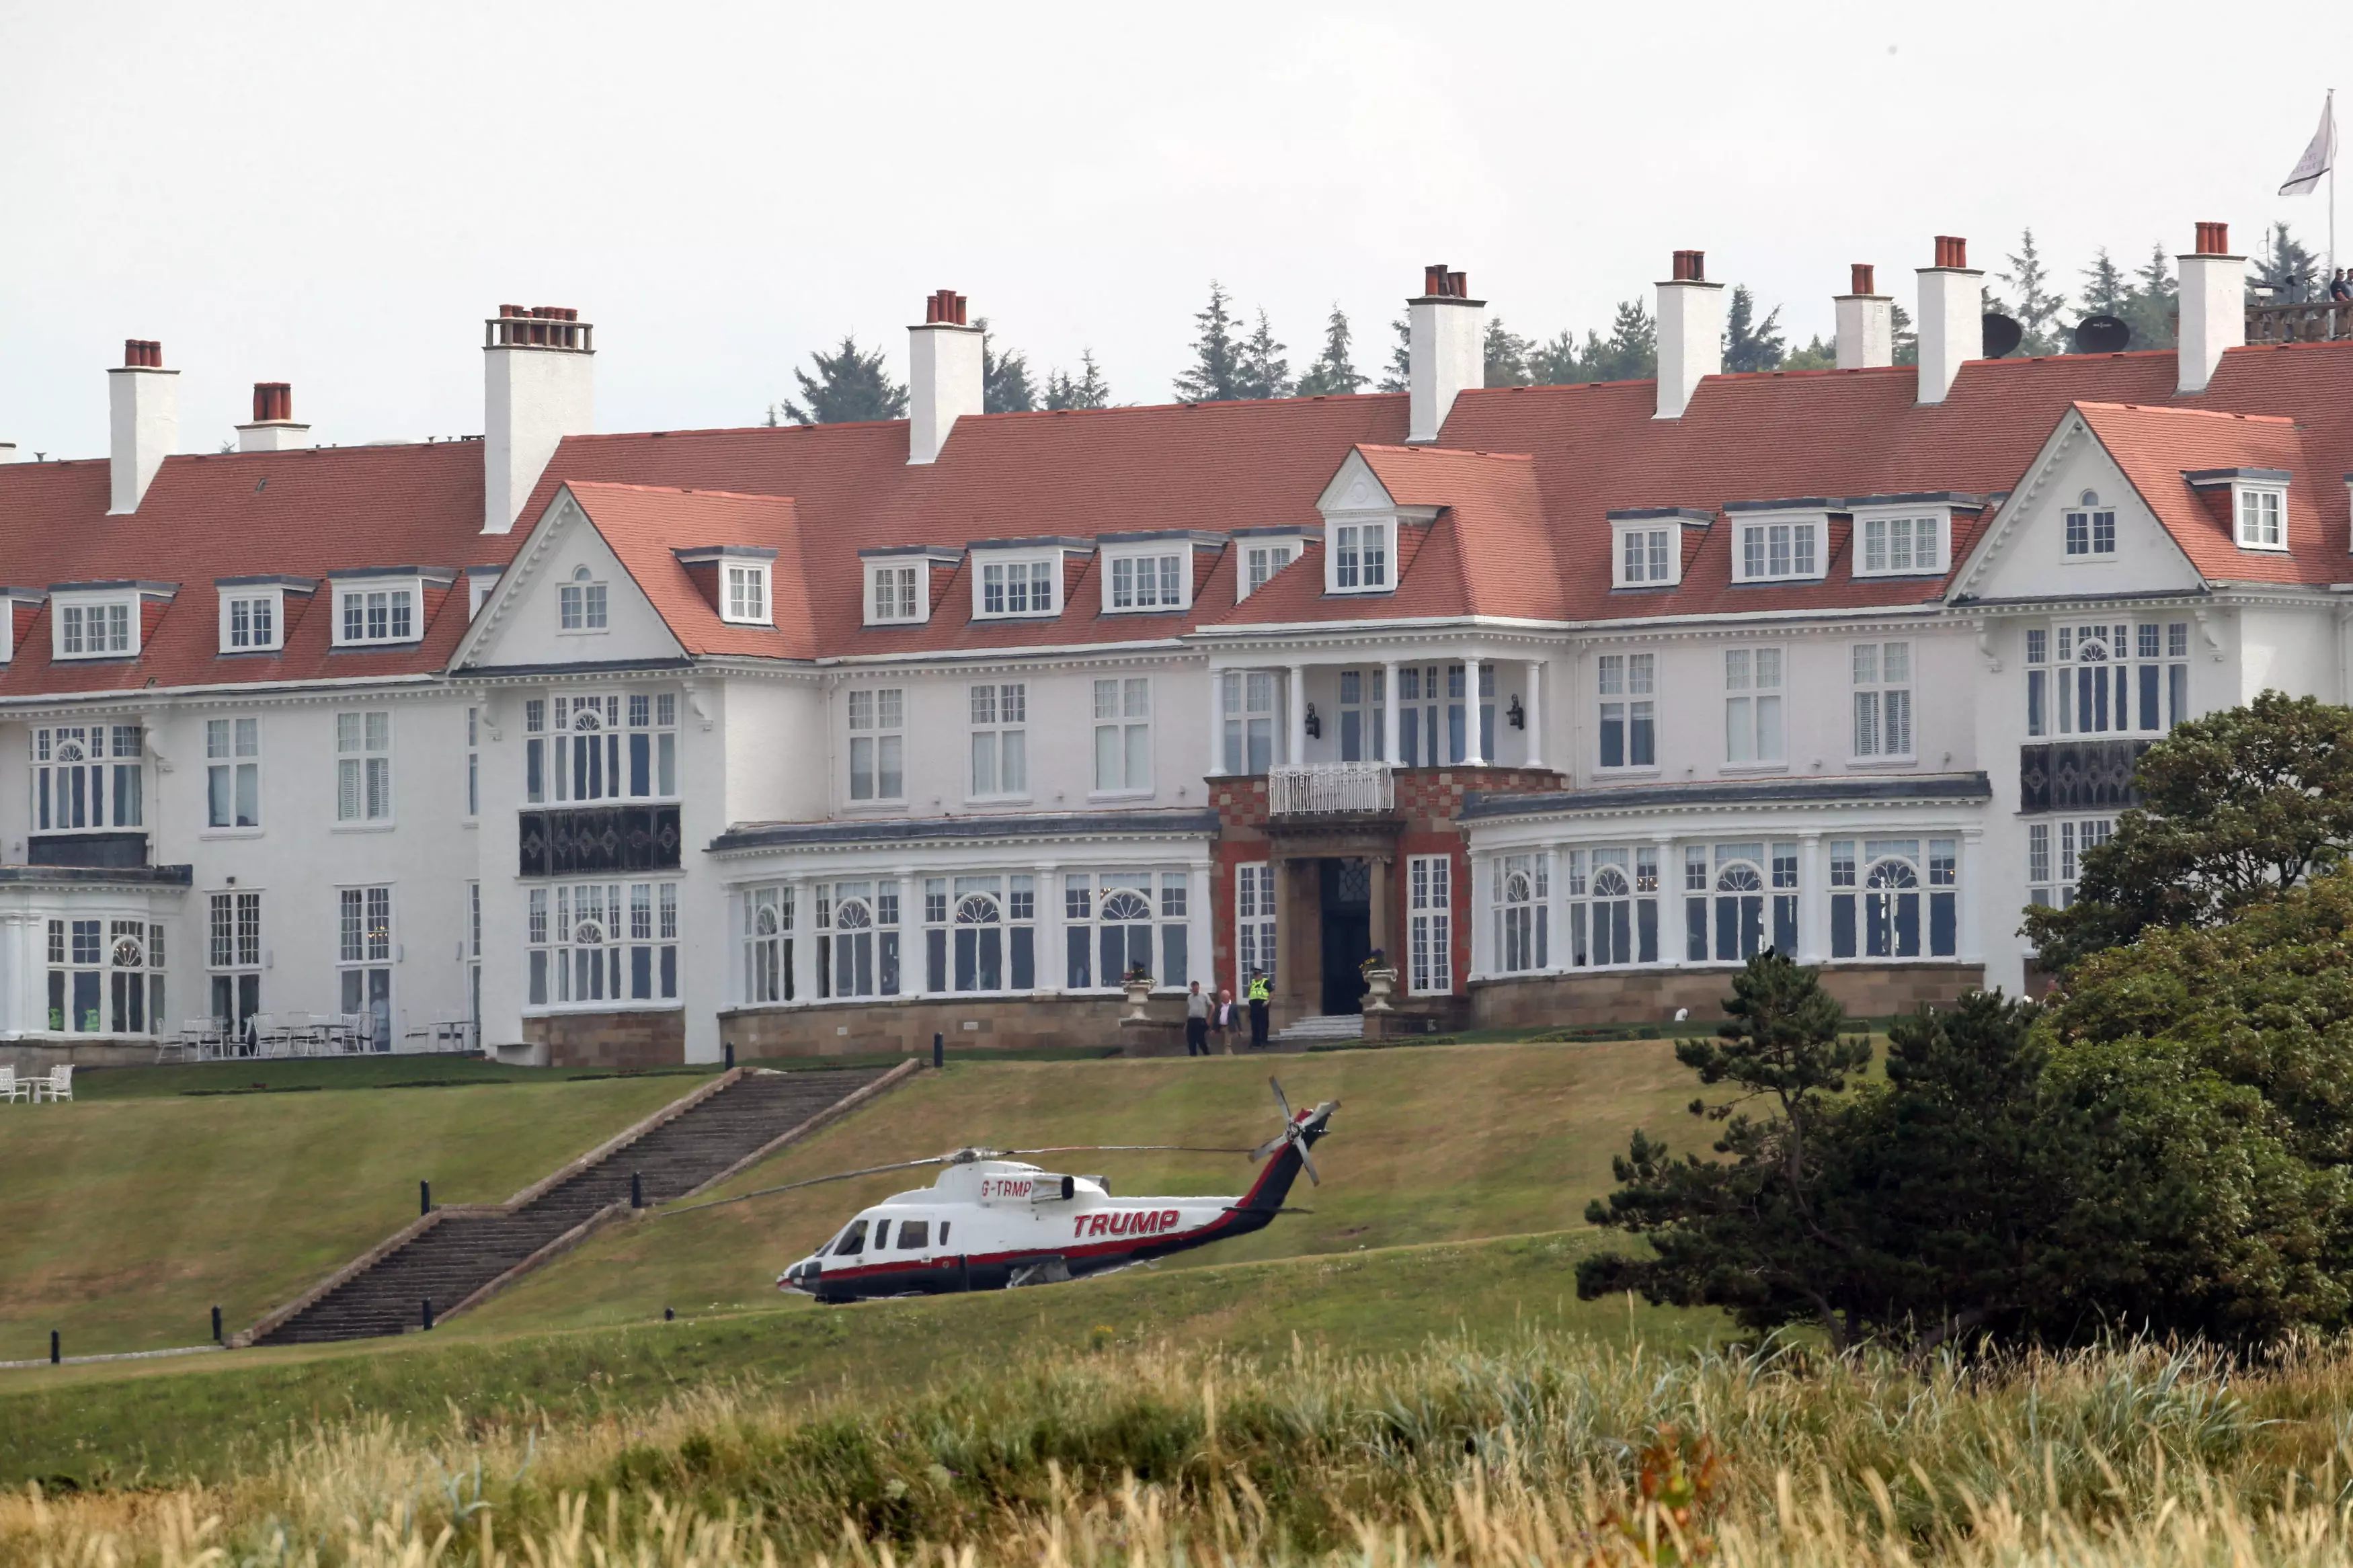 Trump Turnberry is an exclusive golf club in Ayrshire.